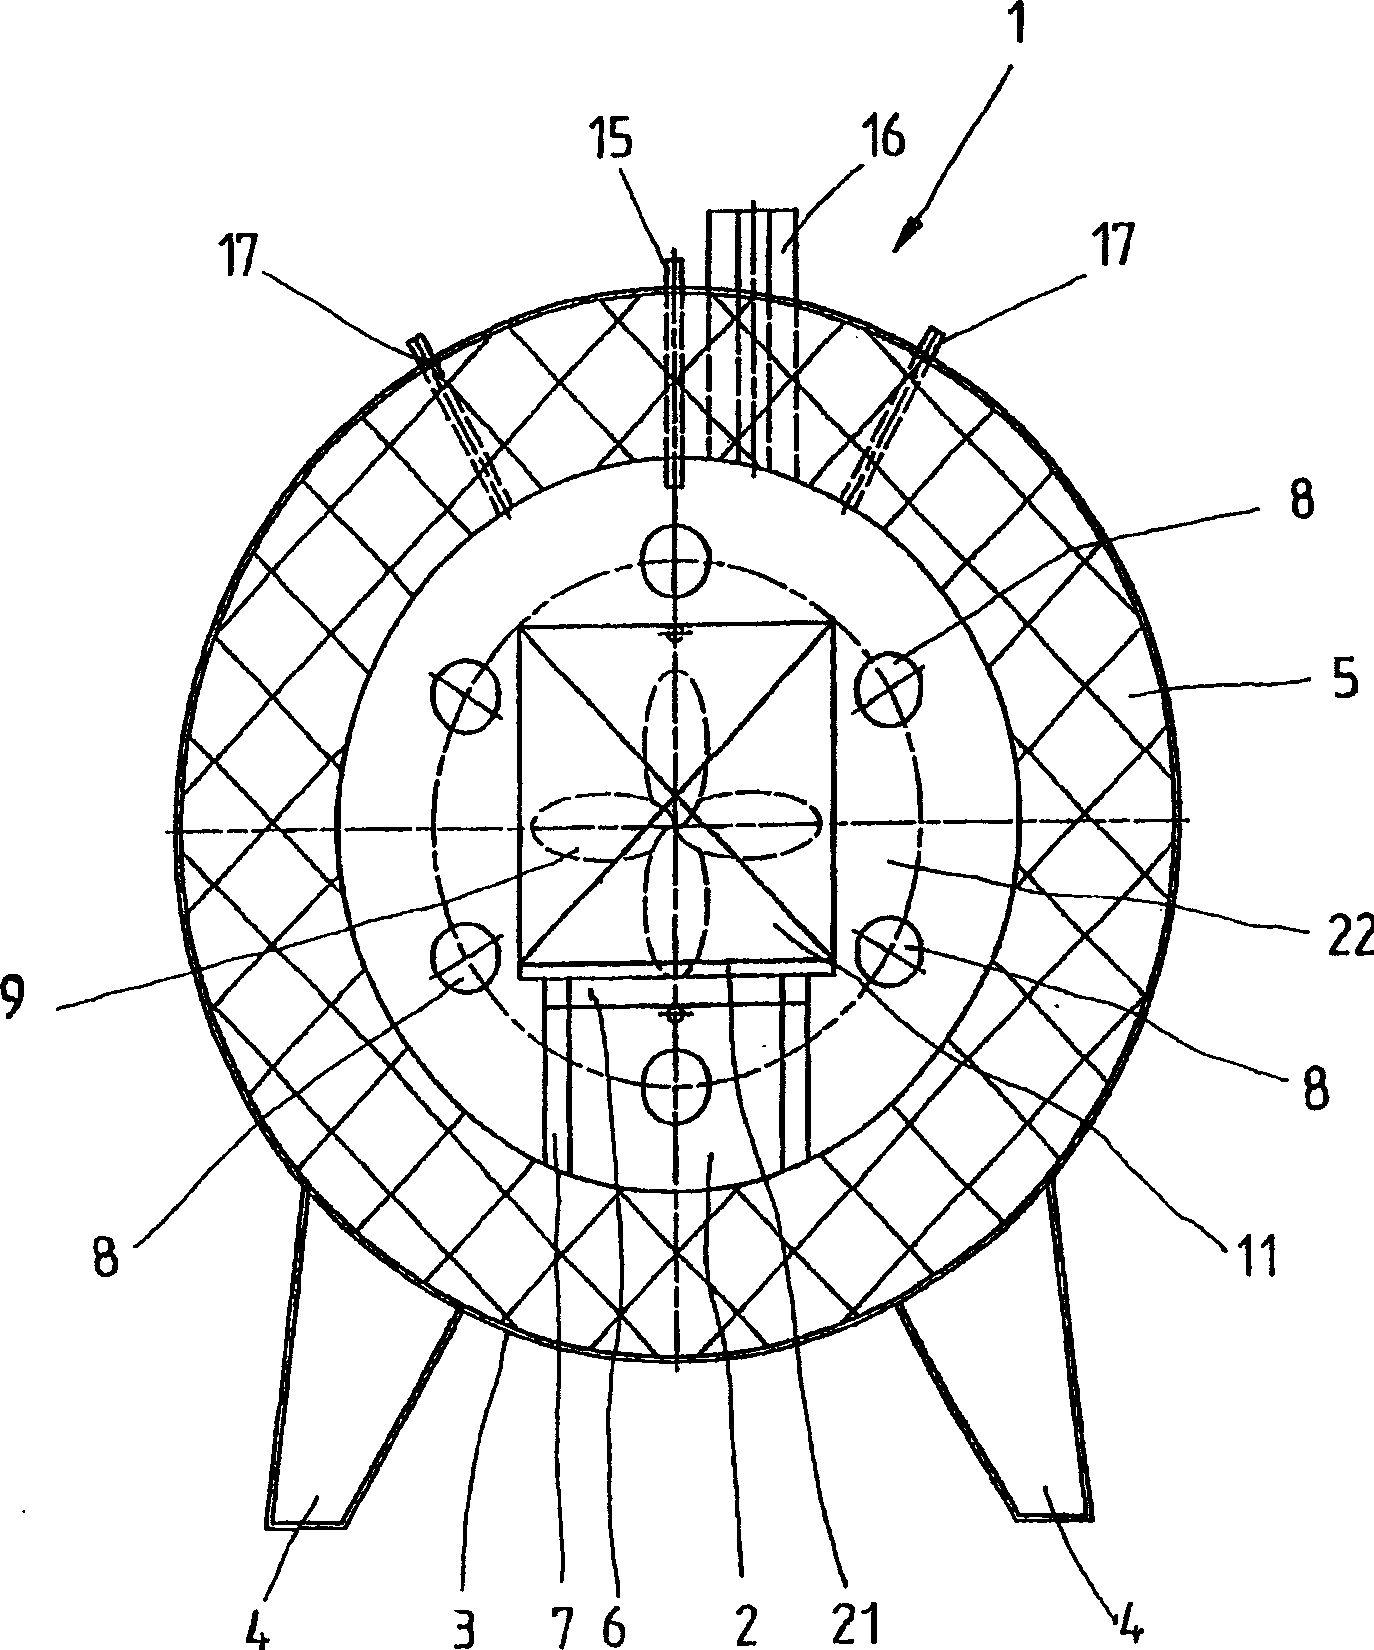 Apparatus and method for heat treatment of metallic work pieces